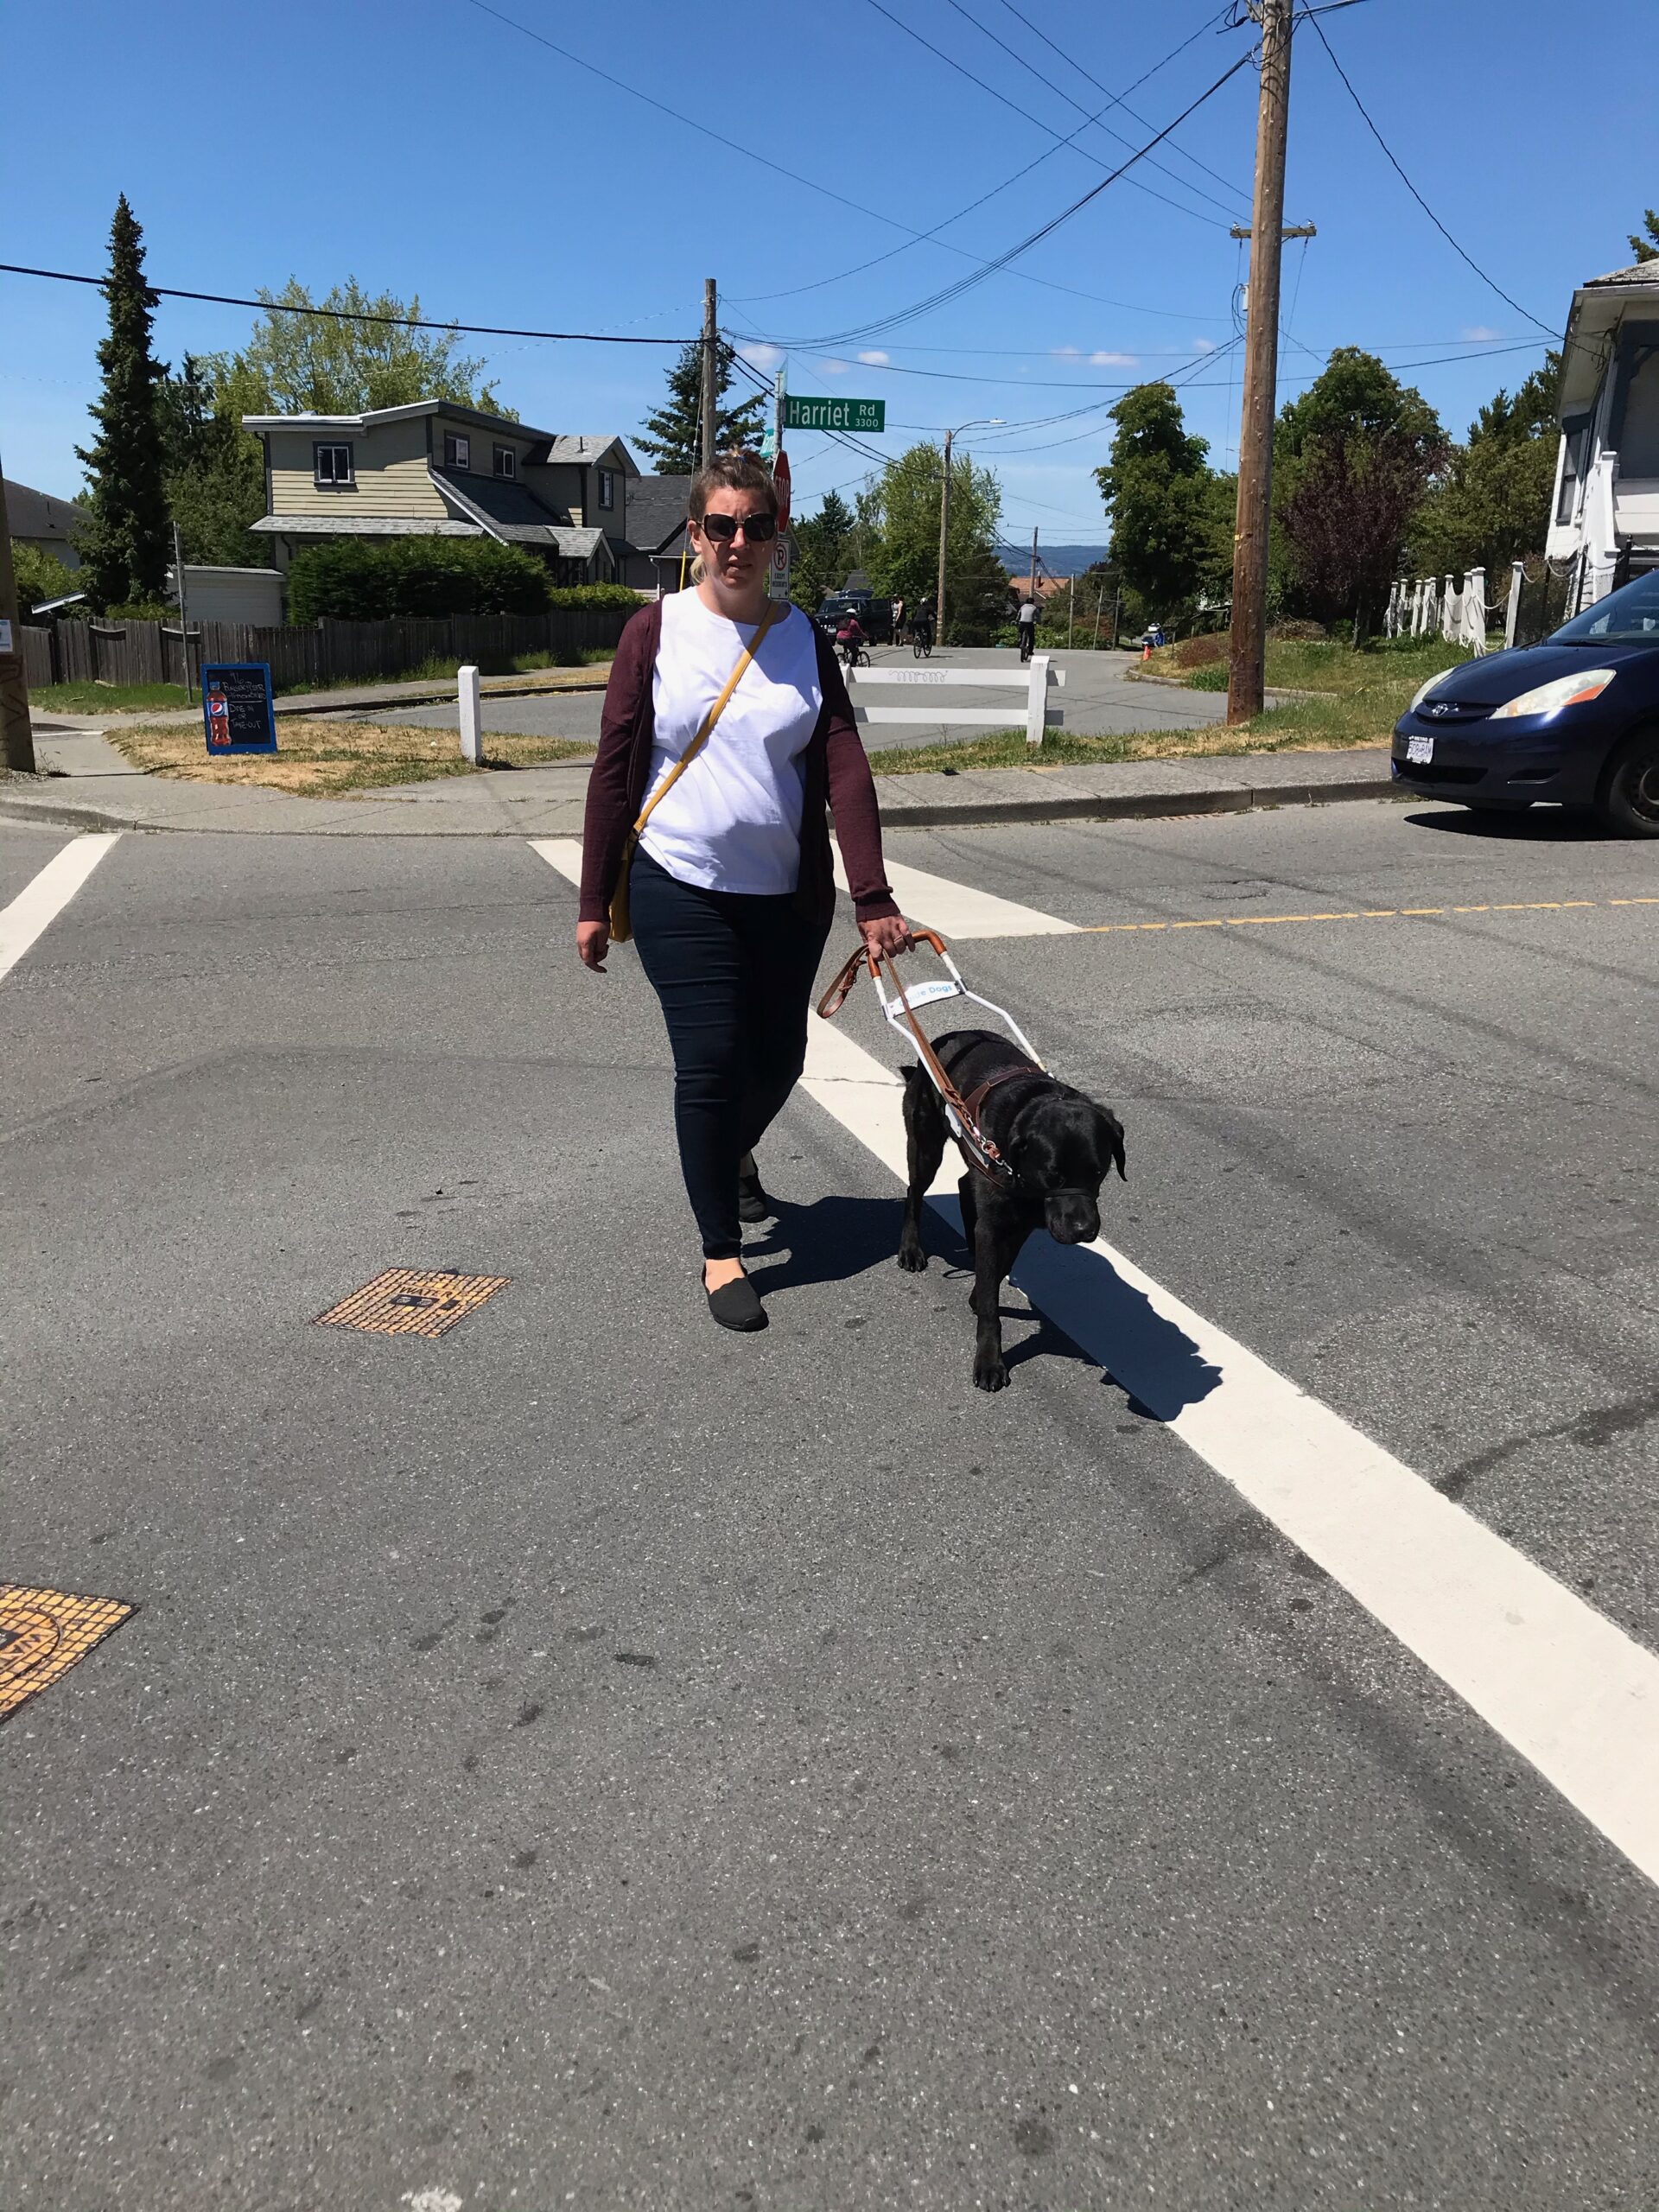 A photo of Shauna and guide dog, Barney, taken in May 2021, in their home area of Victoria, British Columbia. They are crossing a street. This is a front facing view of Shauna and Barney working. Shauna  is wearing her long blonde hair pulled back in a ponytail, and is wearing a white T-shirt, navy blue jeans, a burgundy cardigan, black sketchers, and caring a bright yellow purse. She is also wearing dark sunglasses, that have silver frames. Barney is a black Labrador retriever, wearing his GDB harness, black Martingale collar, black gentle leader, and brown leather leash.